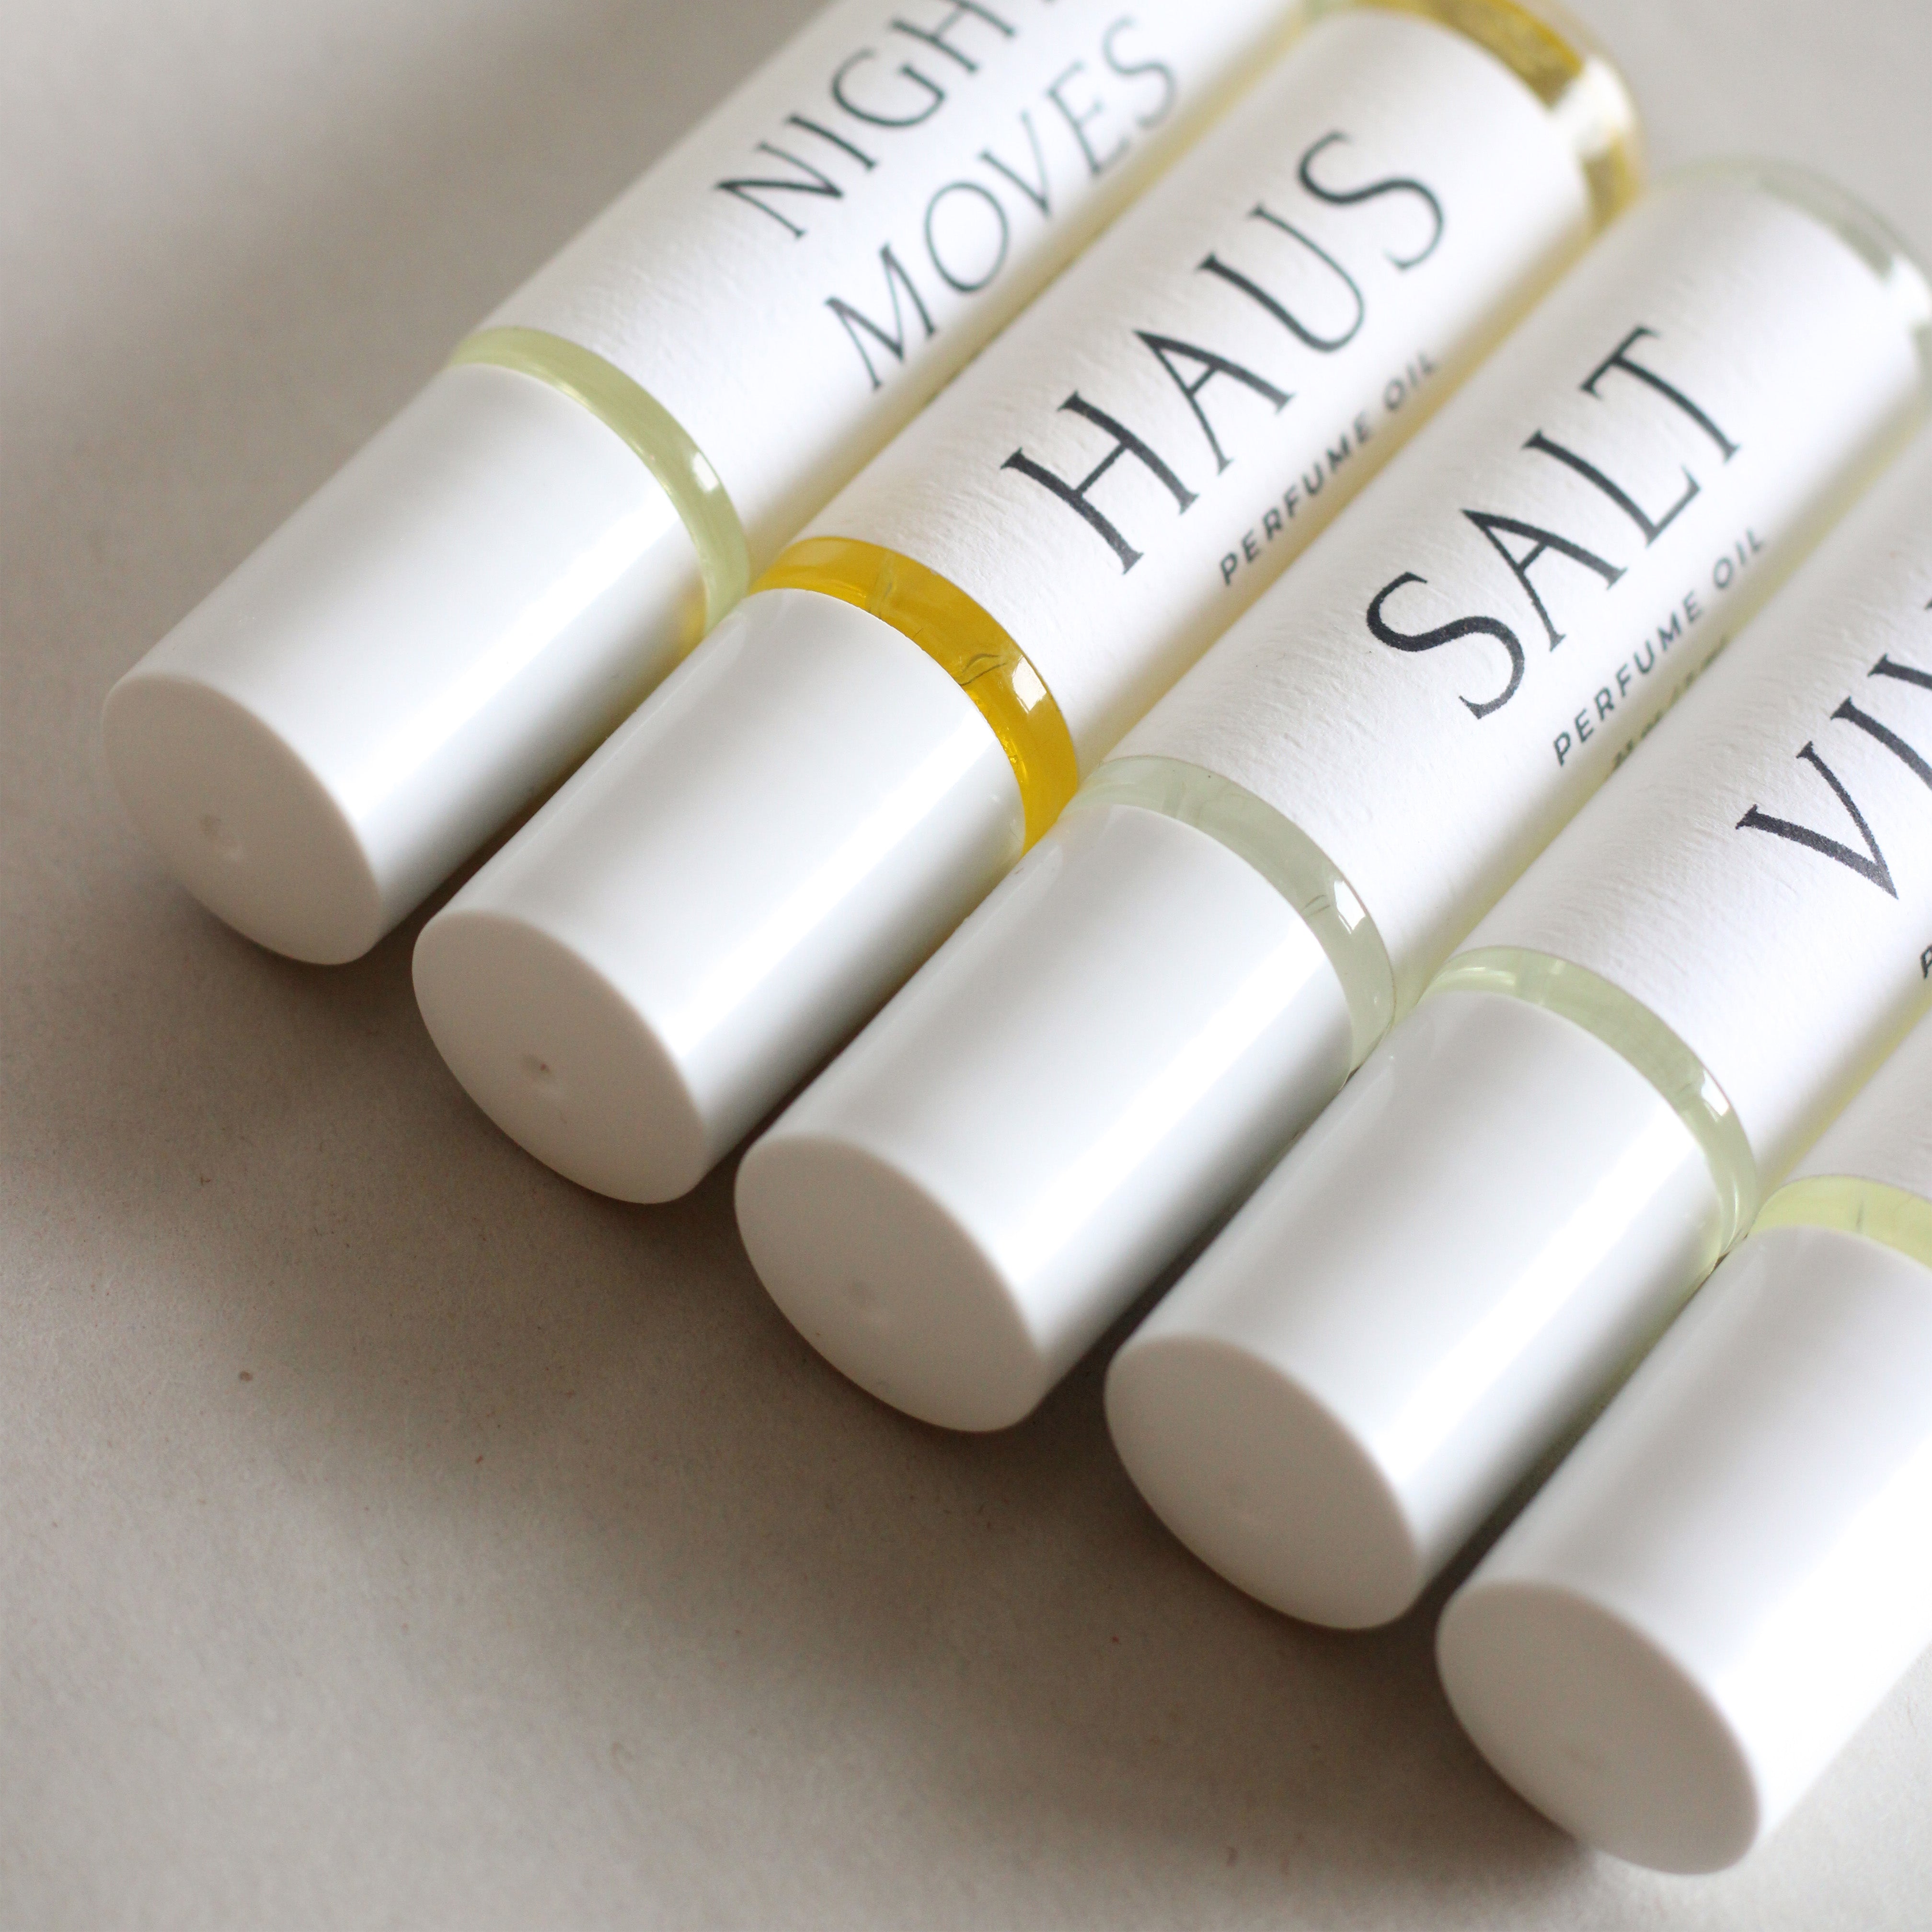 Haus Roll-On Perfume Oil | Well-Taylored Co.